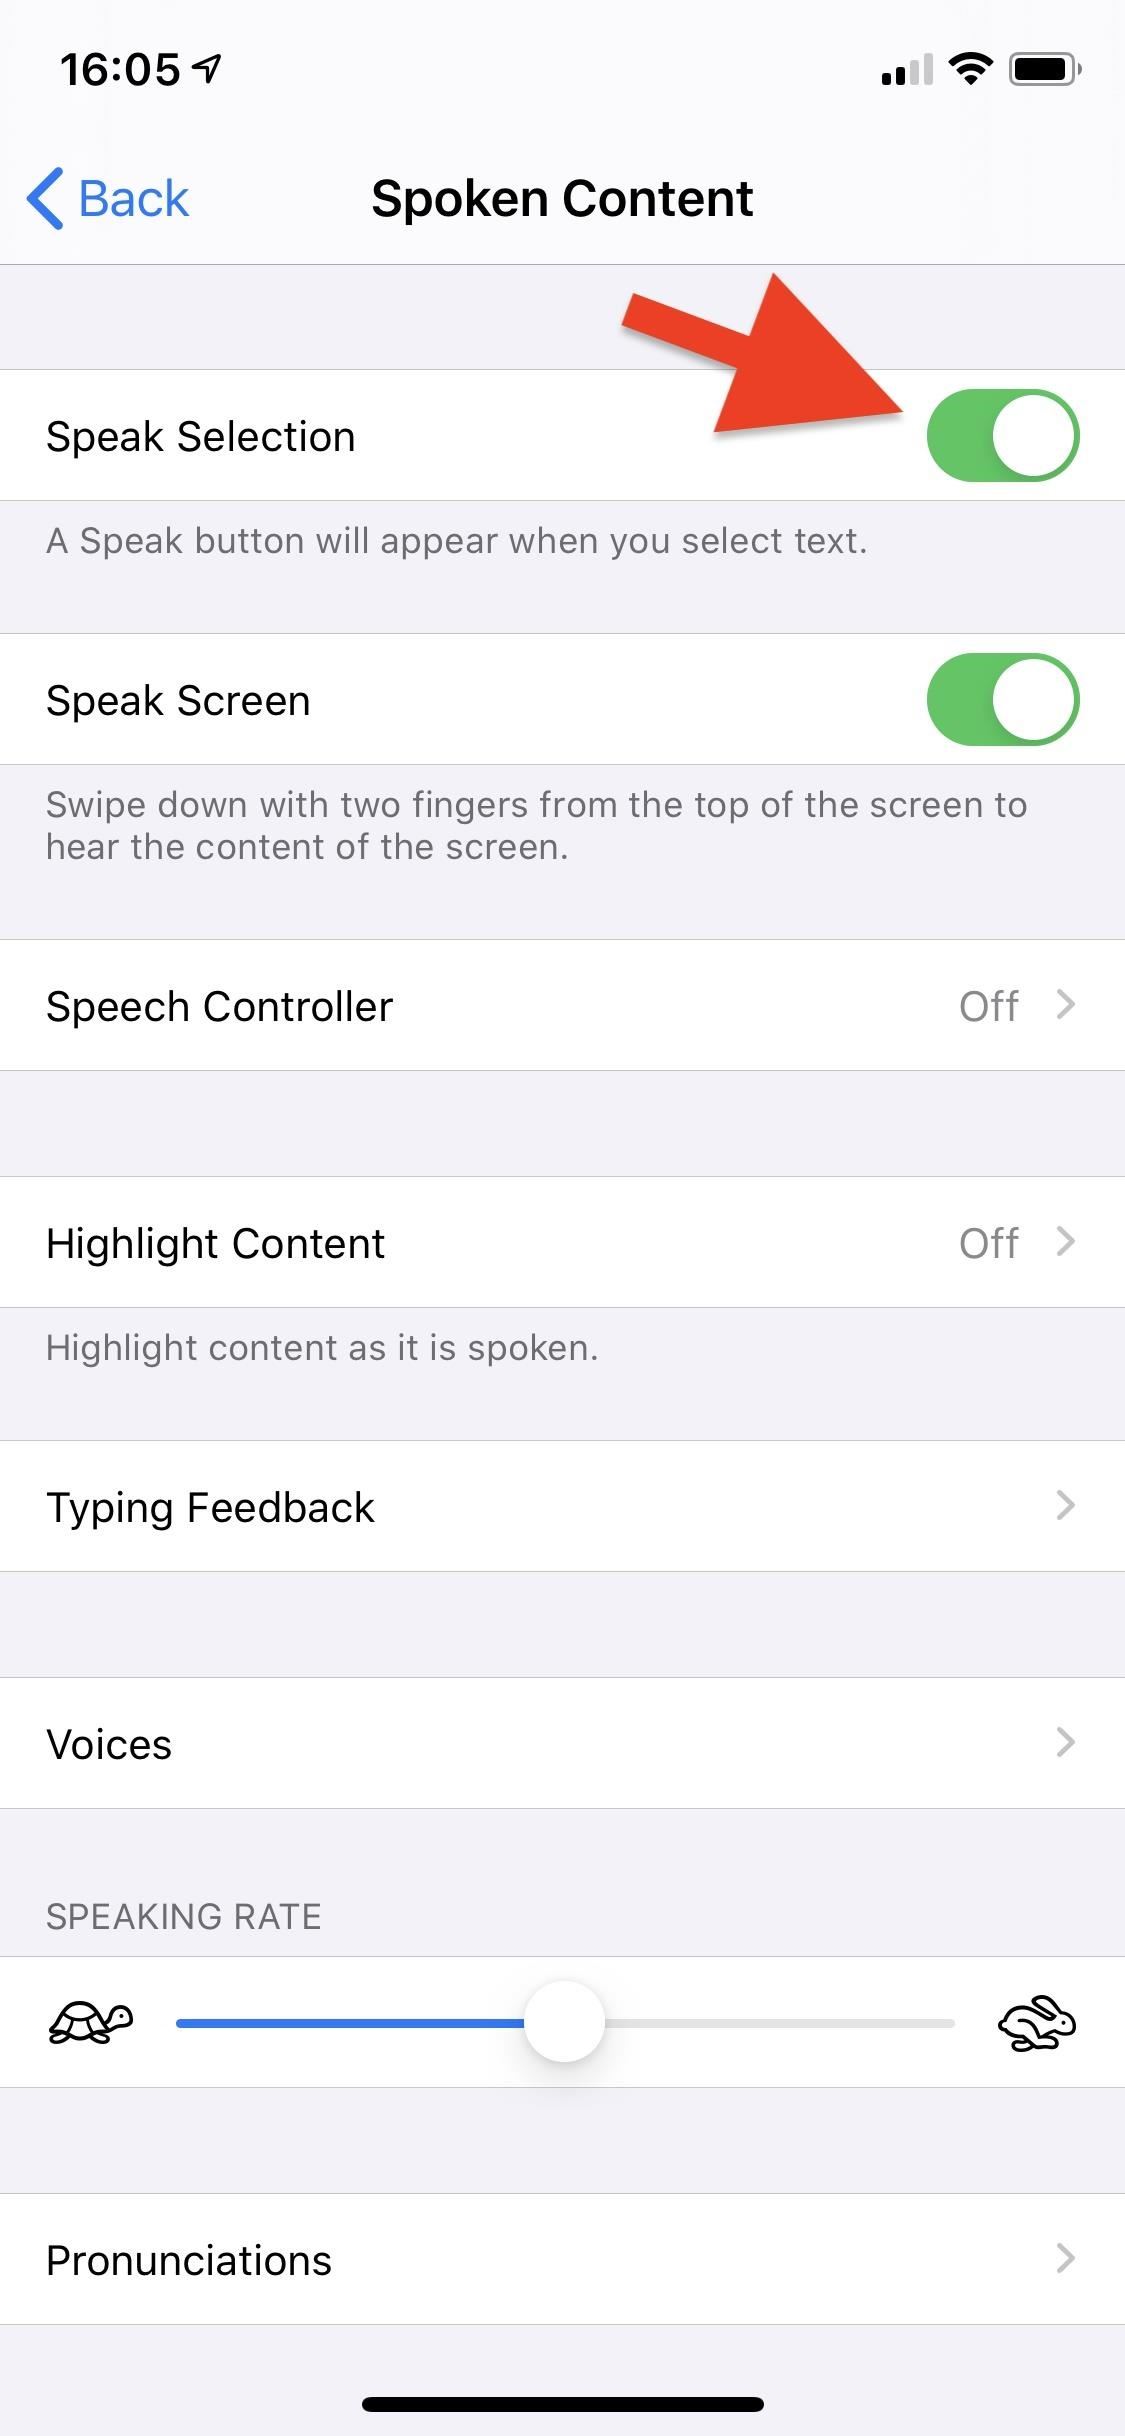 Learn Pronunciations for Any Word on Your iPhone in Two Quick Actions